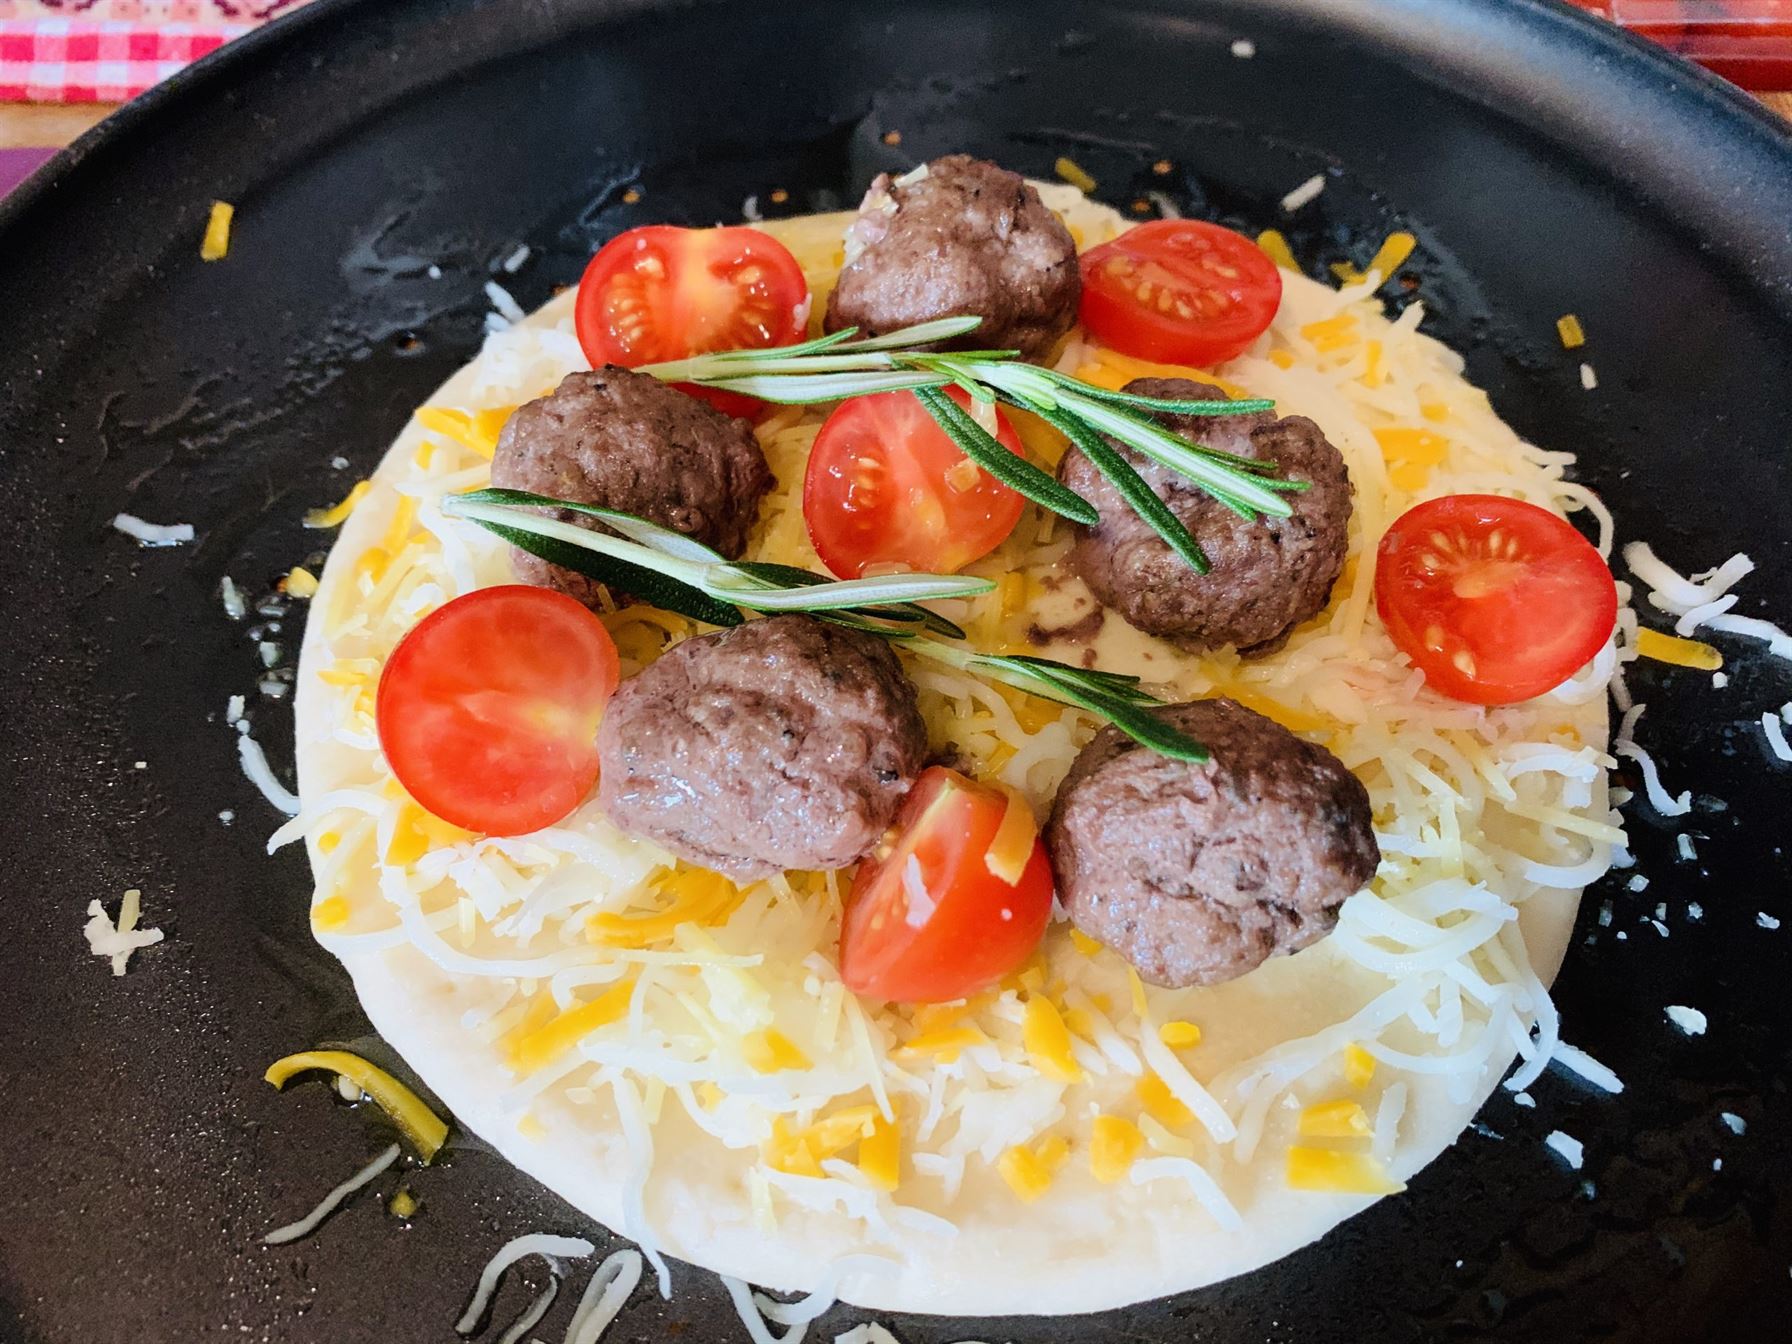 Best Kids Pizza Recipe with Wagyu Meatballs and Black Truffle